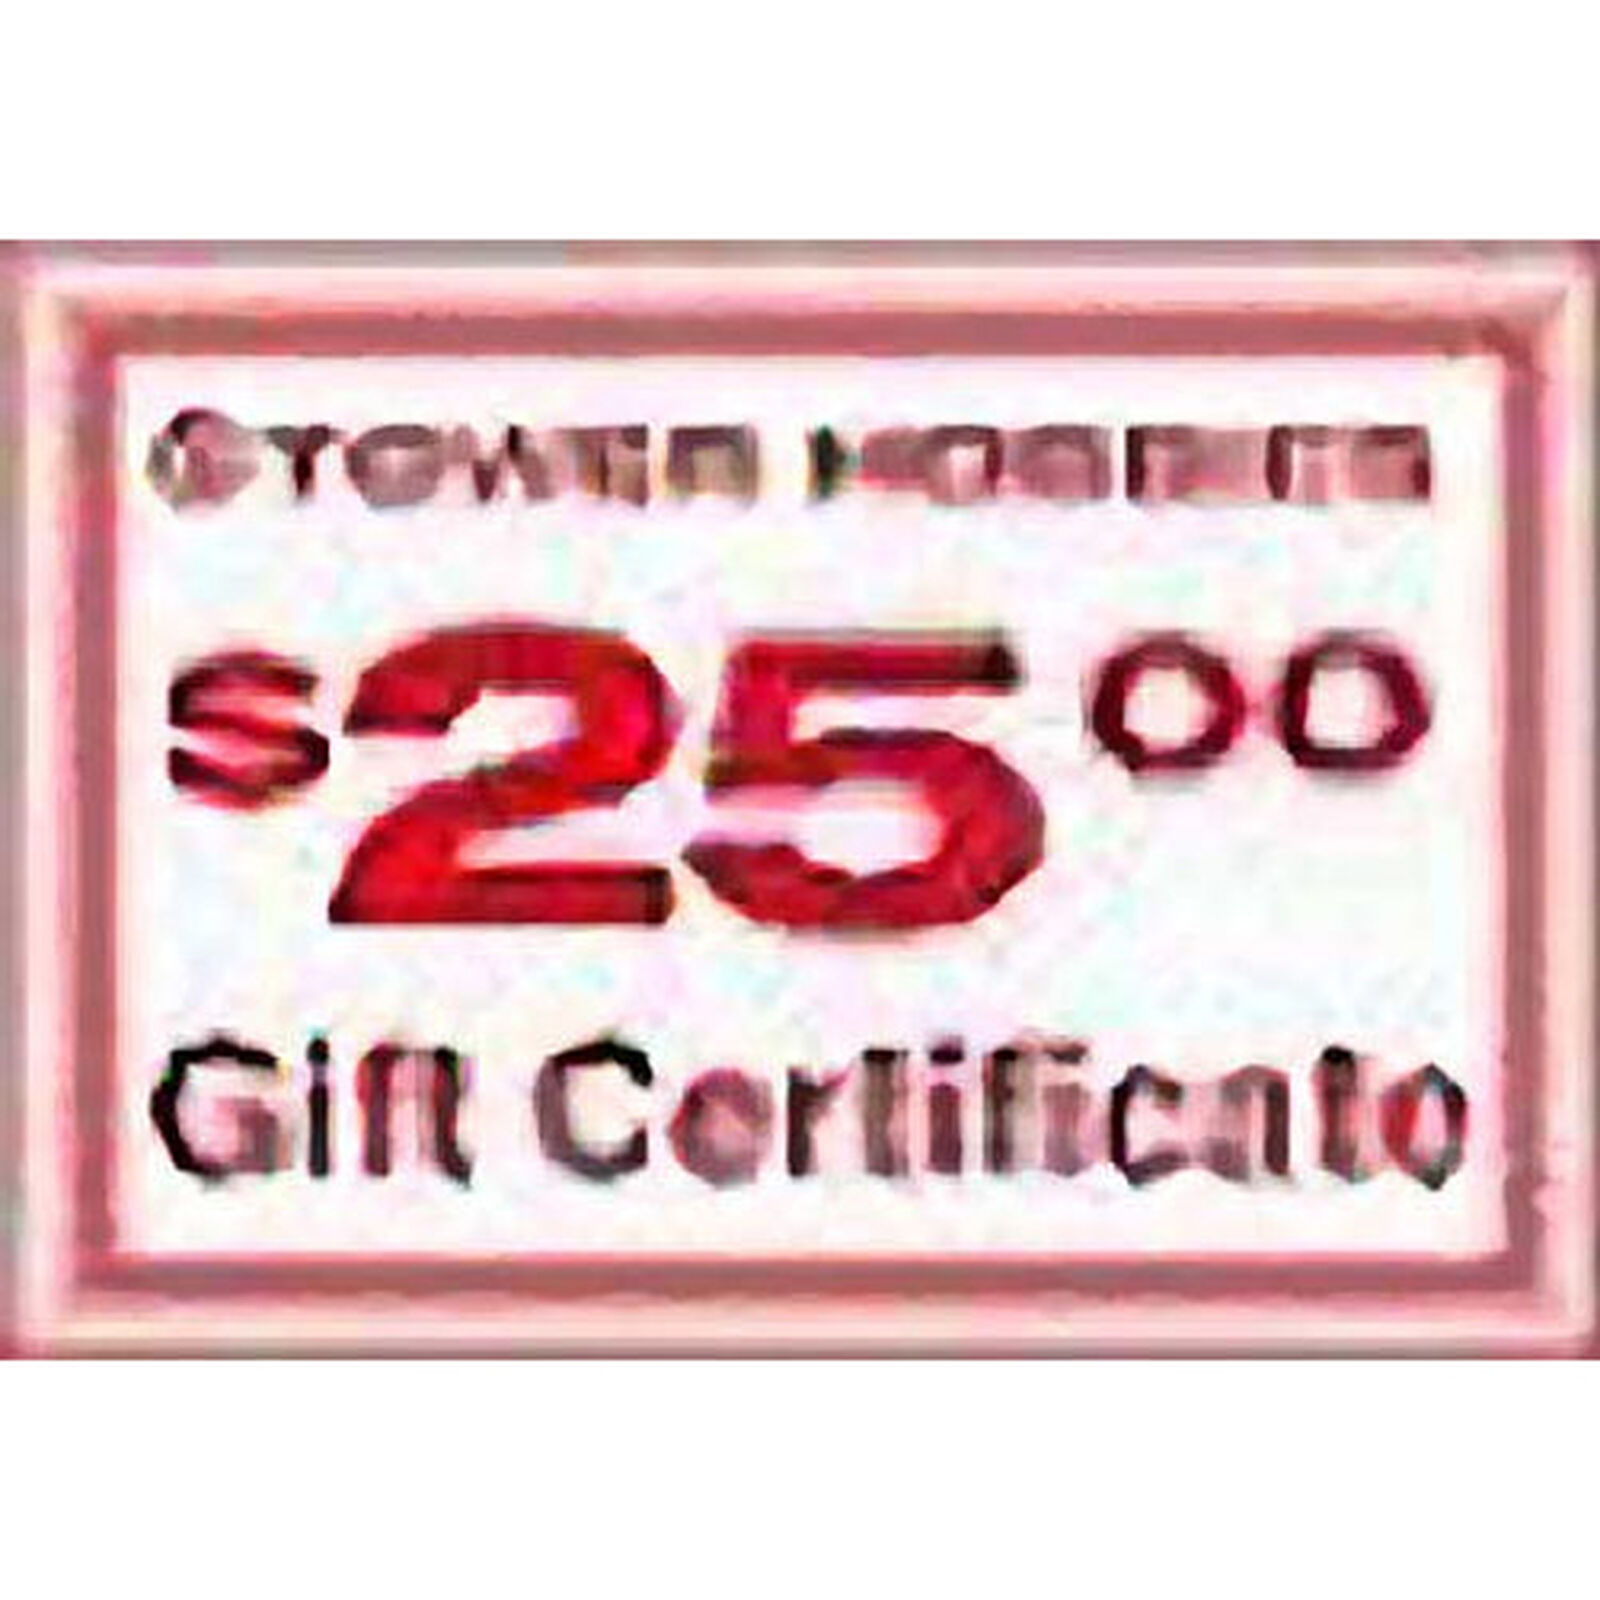 Tower Gift Certificate Promotion